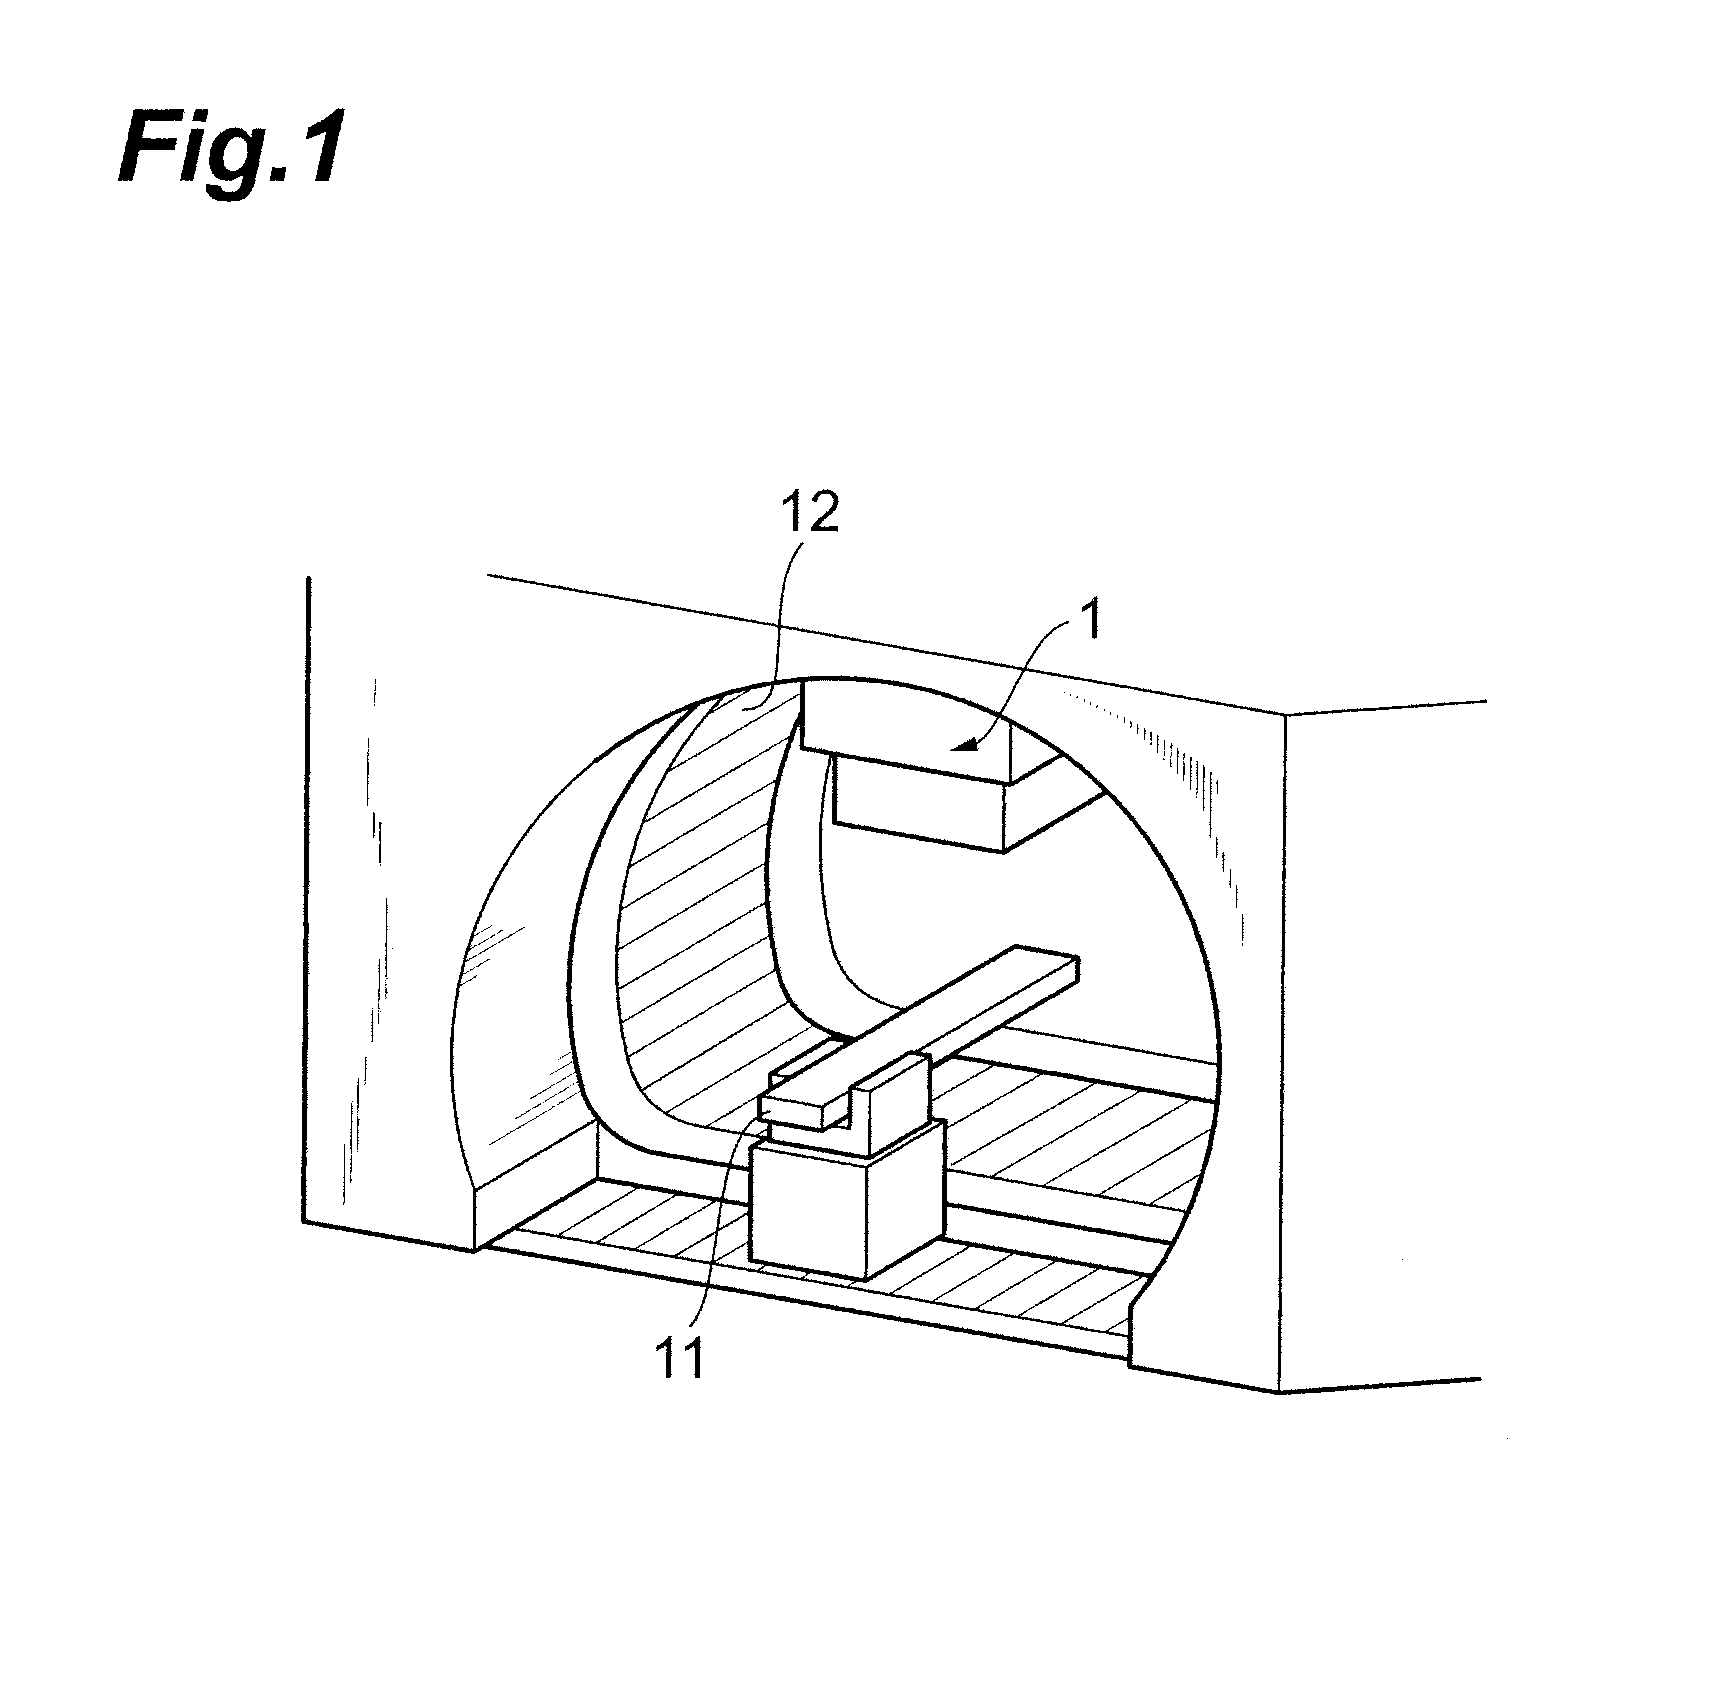 Charged particle beam irradiating apparatus